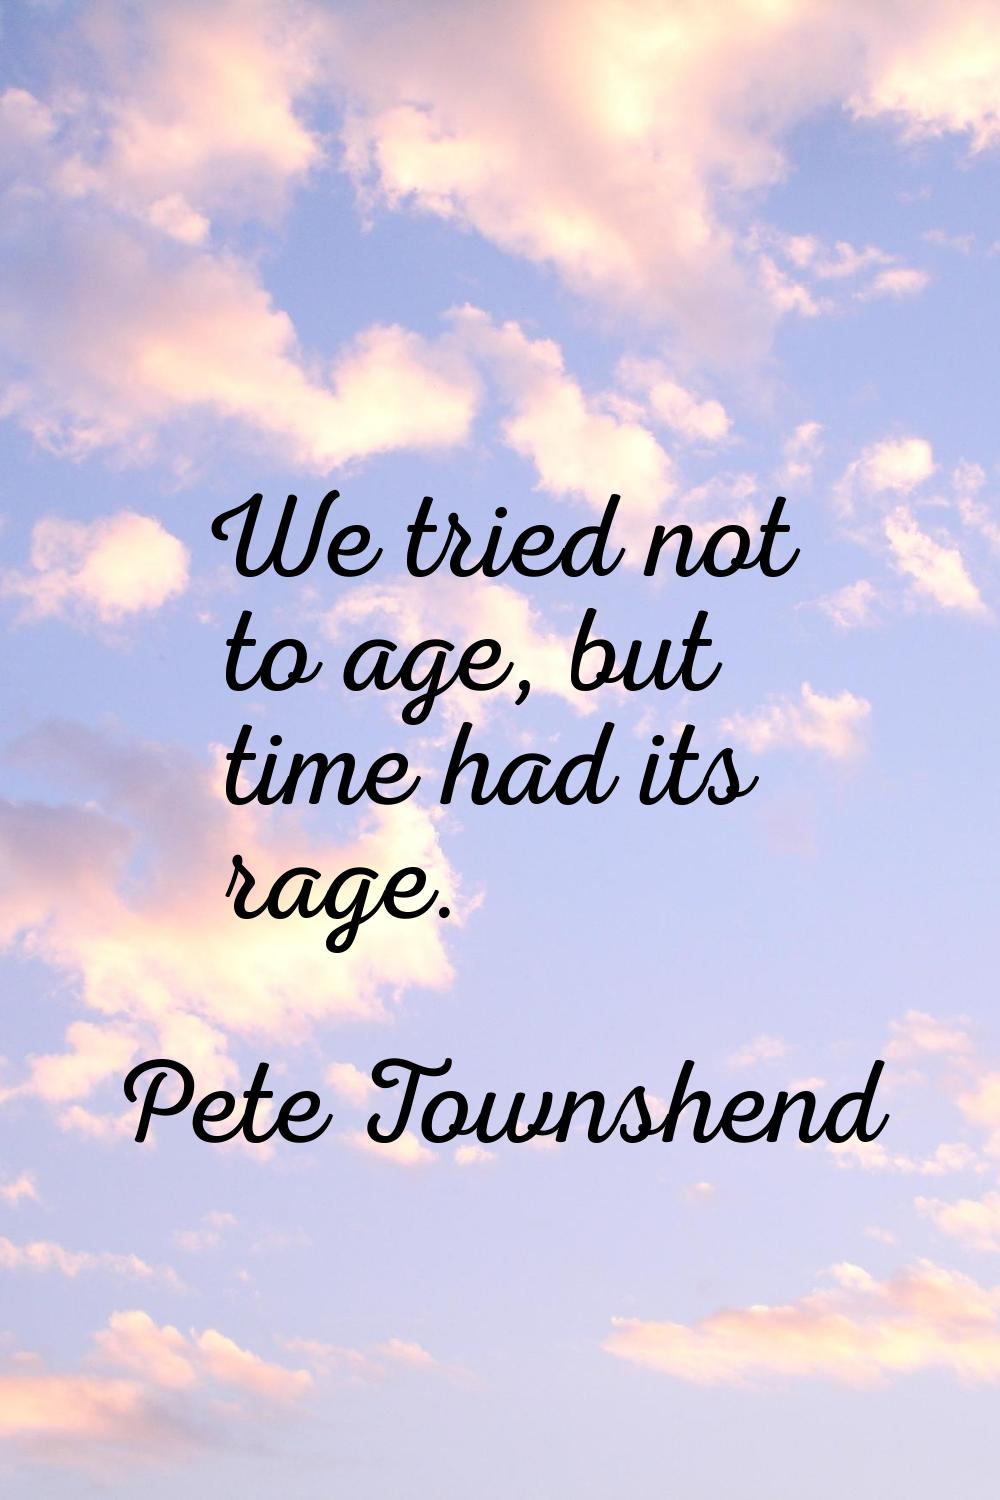 We tried not to age, but time had its rage.